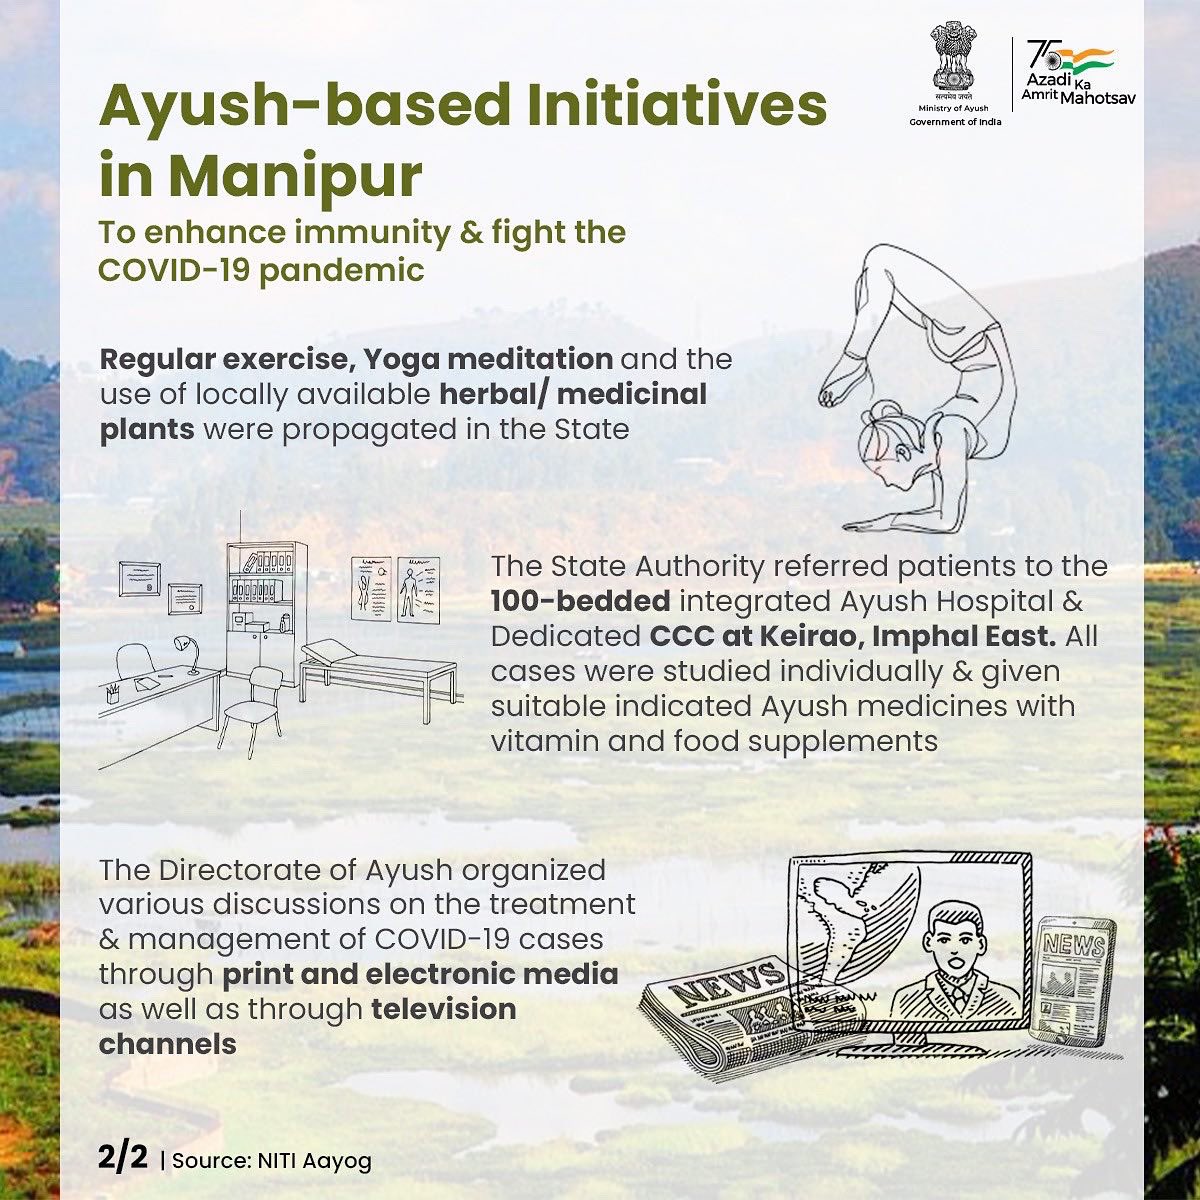 The report launched by @NITIAayog & MoA, on the initiatives taken by various States & UTs to manage the pandemic, highlights the Ayush-based practices that were incorporated in Manipur for protection and prevention from #COVID19. #Ayush #HealInIndia #AmritMahotsav